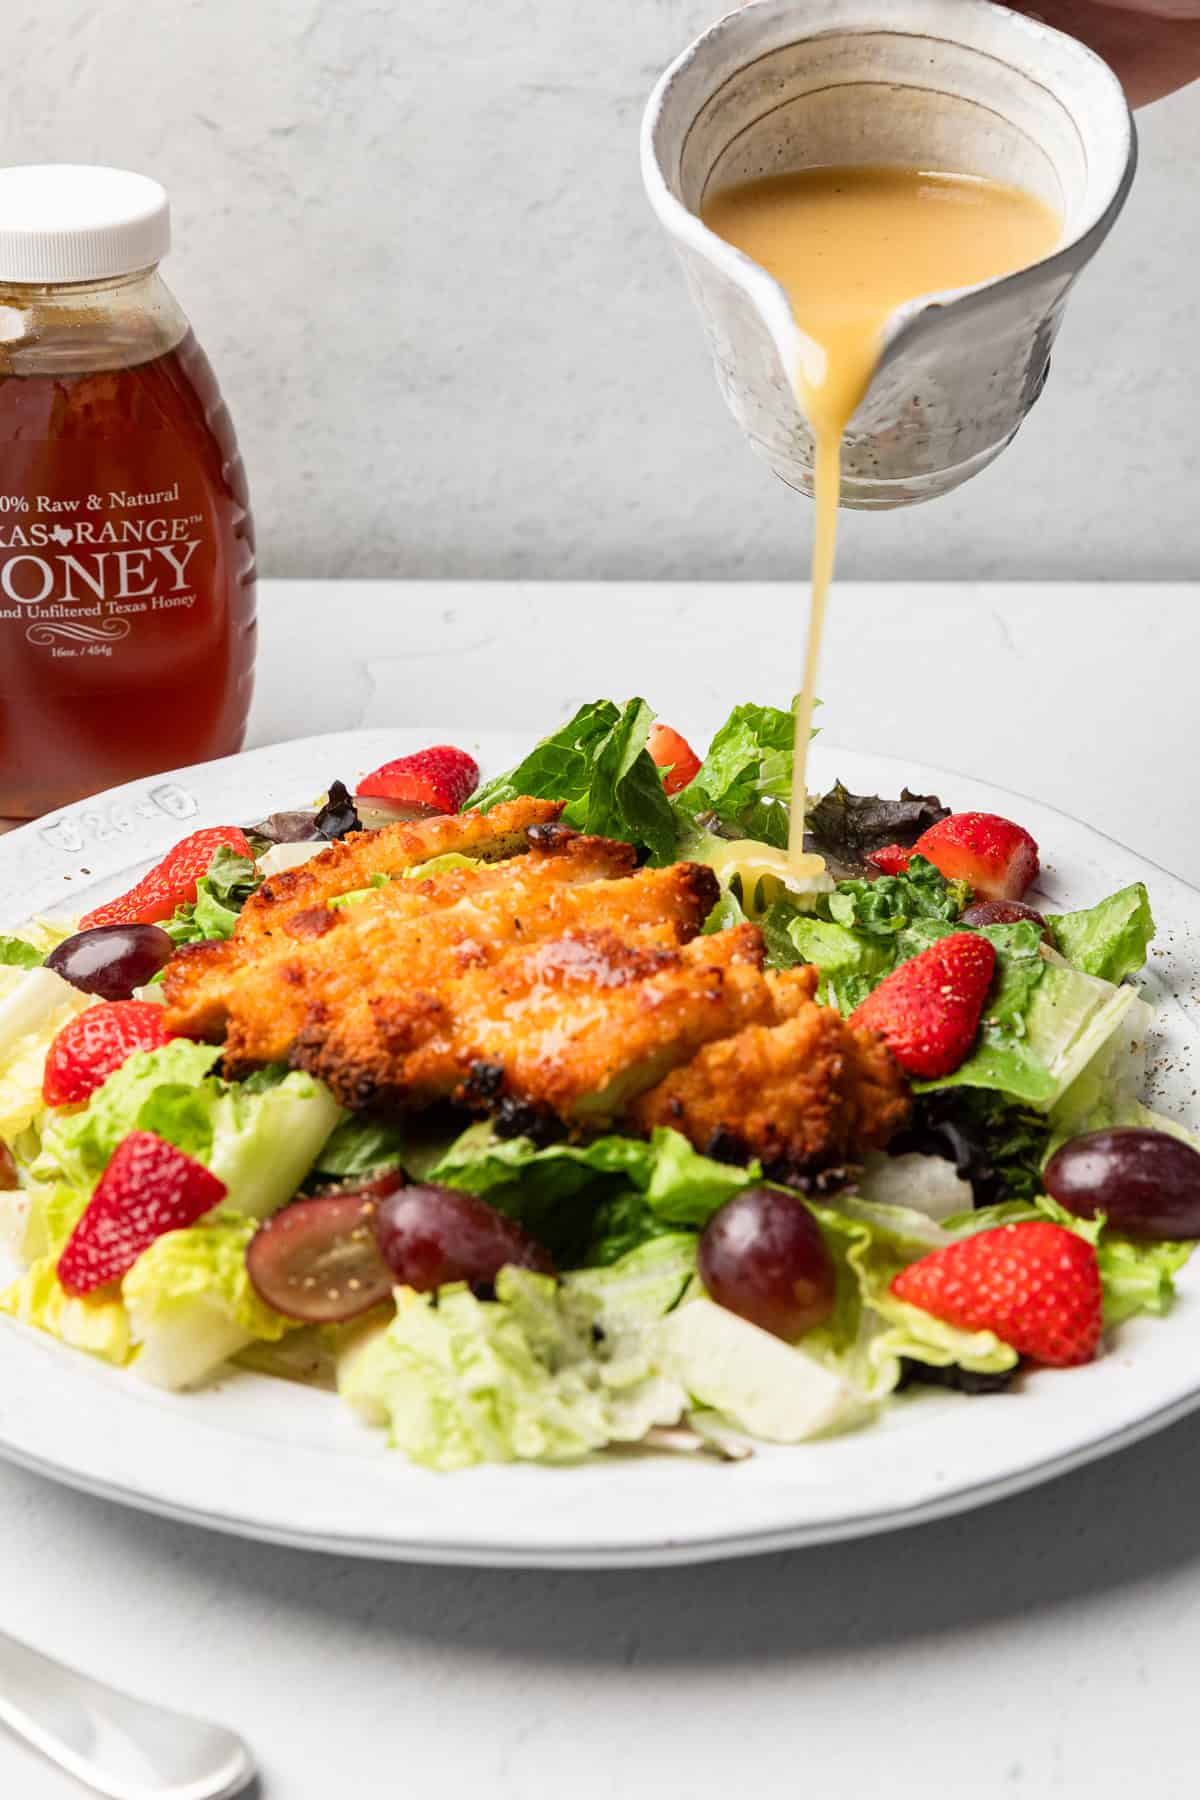 Pouring honey mustard over a salad.